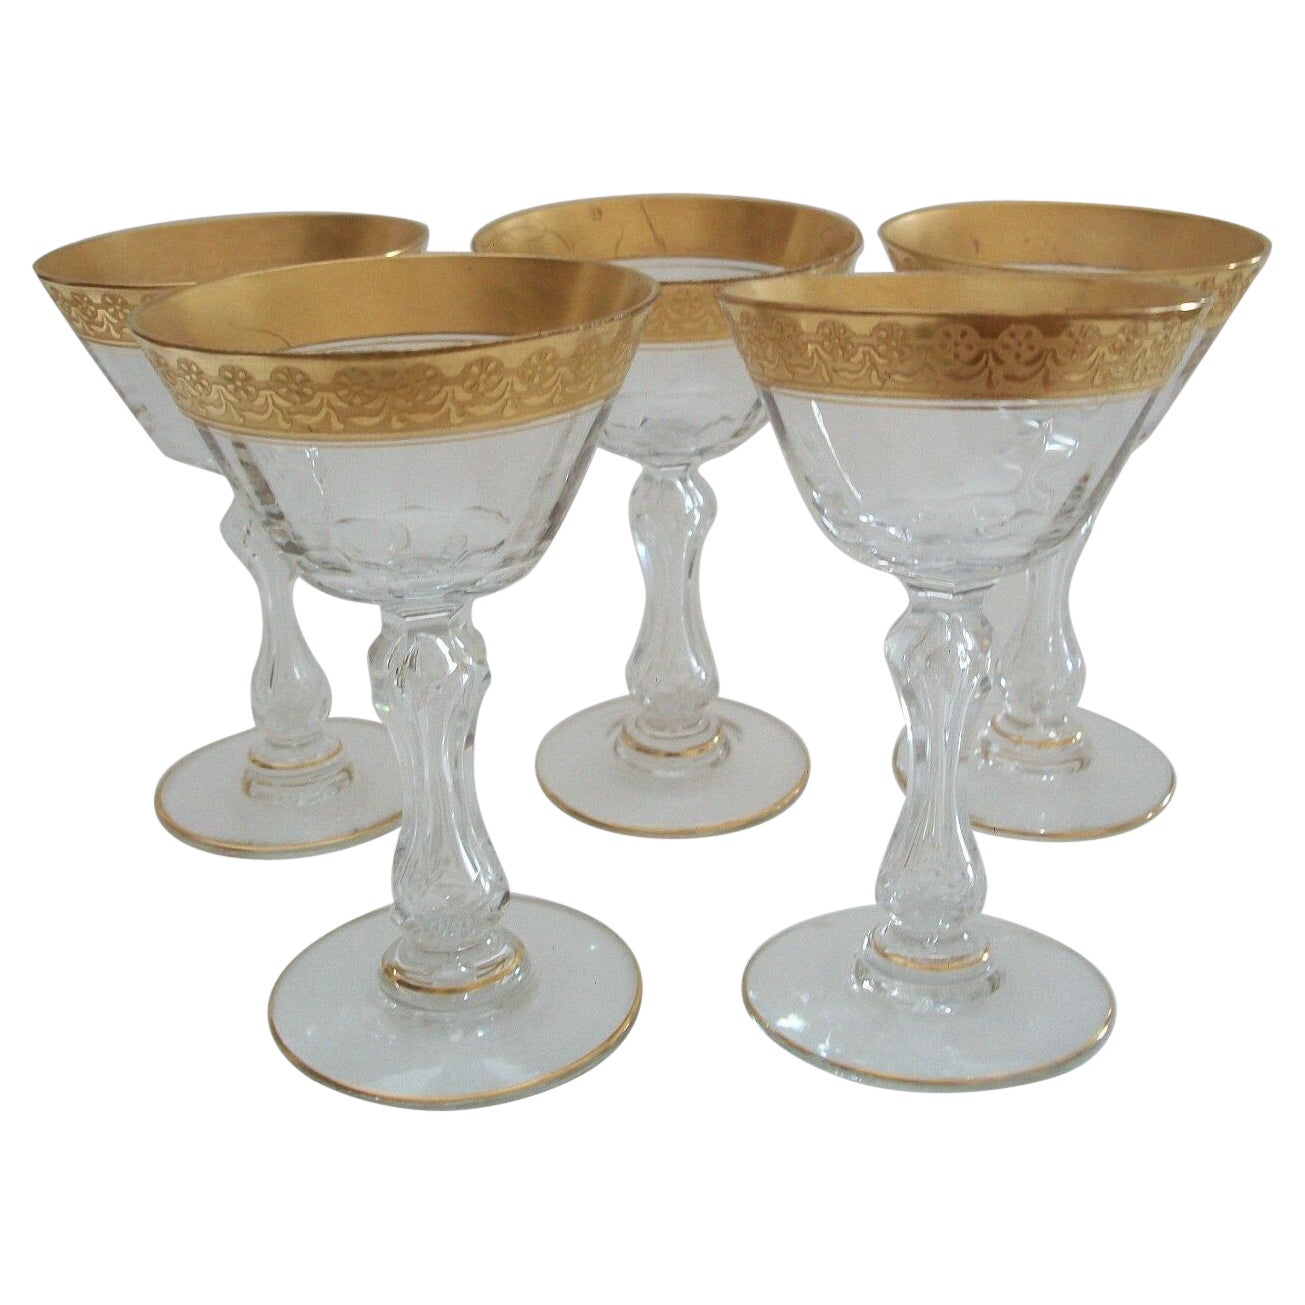 Etched Gold Rim Handcrafted Glass Tumblers - Set of 4